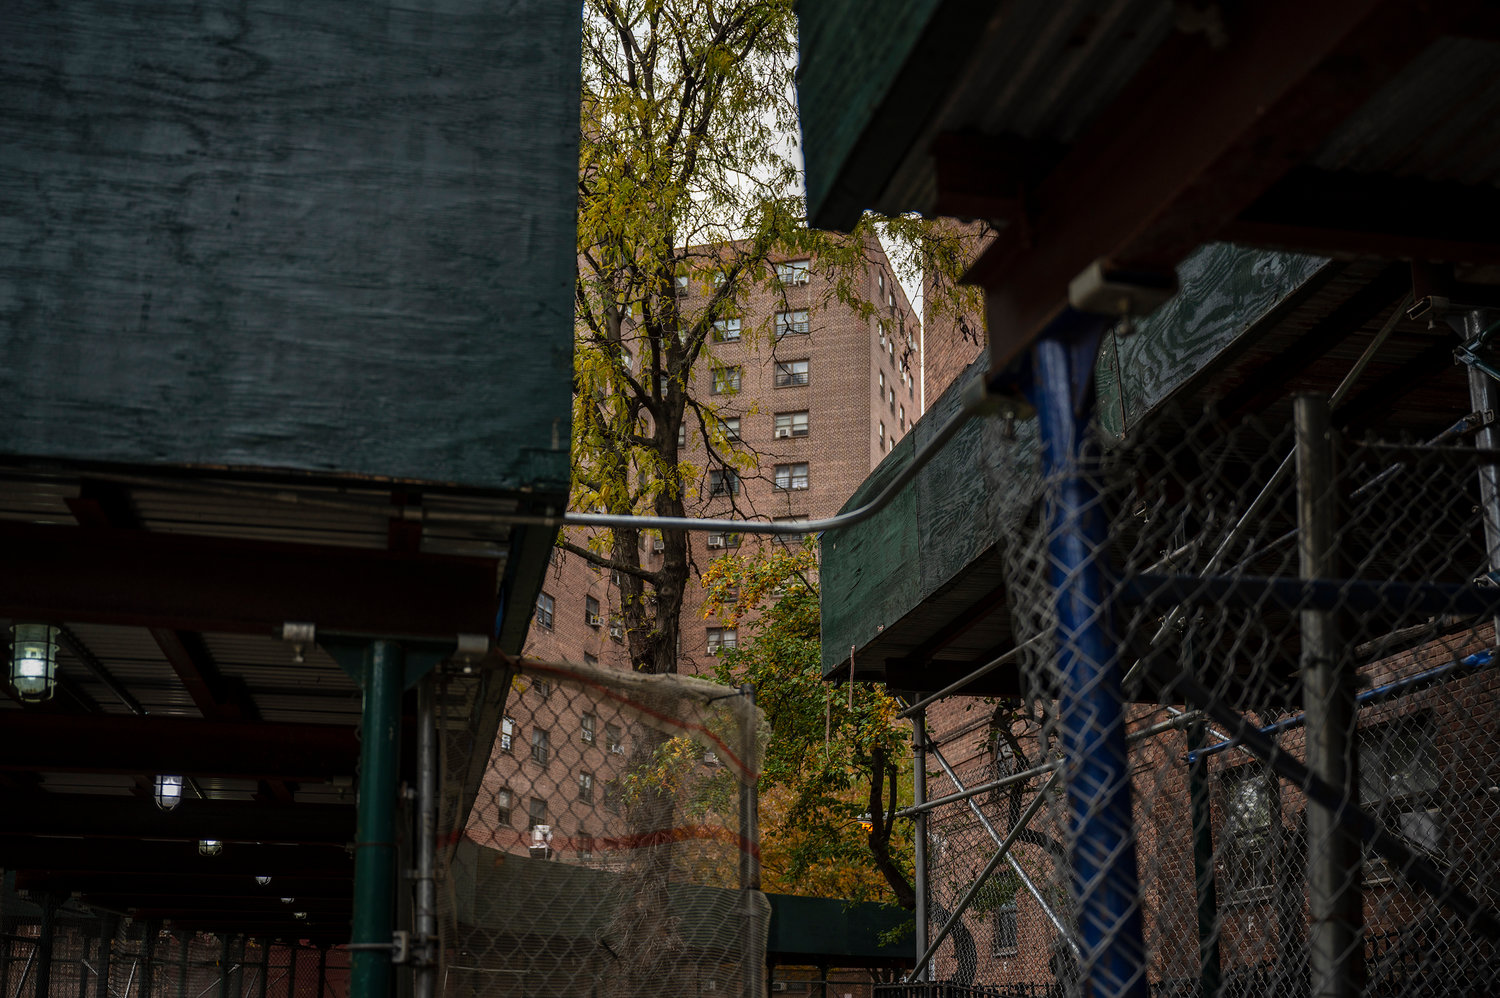 Sidewalk sheds line the perimeter of the buildings at Marble Hill Houses. Tenants say despite some benefits — like protecting pedestrians on the ground from debris falling from above — the structures are an eyesore and have overstayed their welcome.